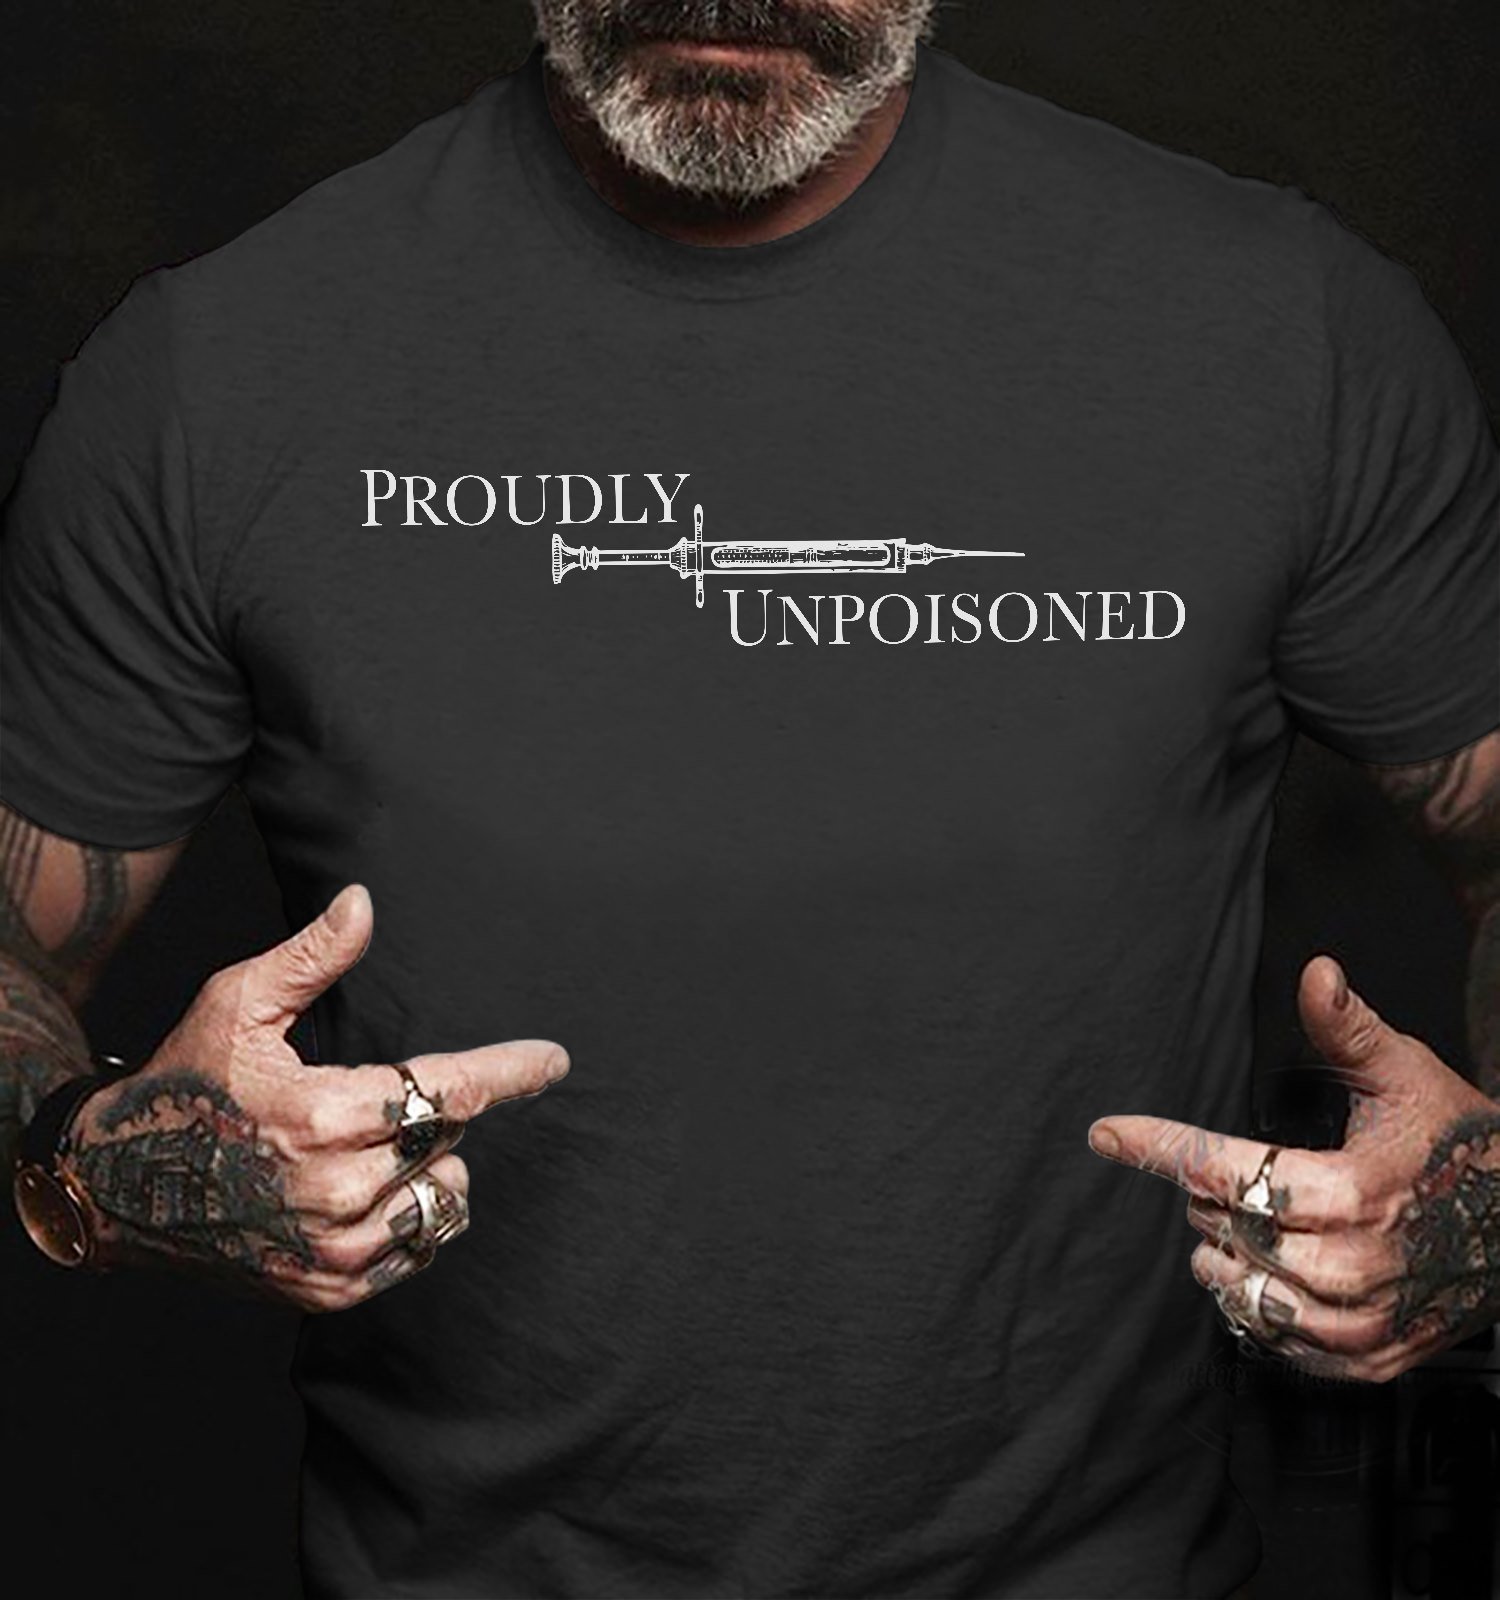 Dad Shirt, Funny Shirt, Birthday Gifts Idea, Proudly Unpoisoned T-Shirt KM1406